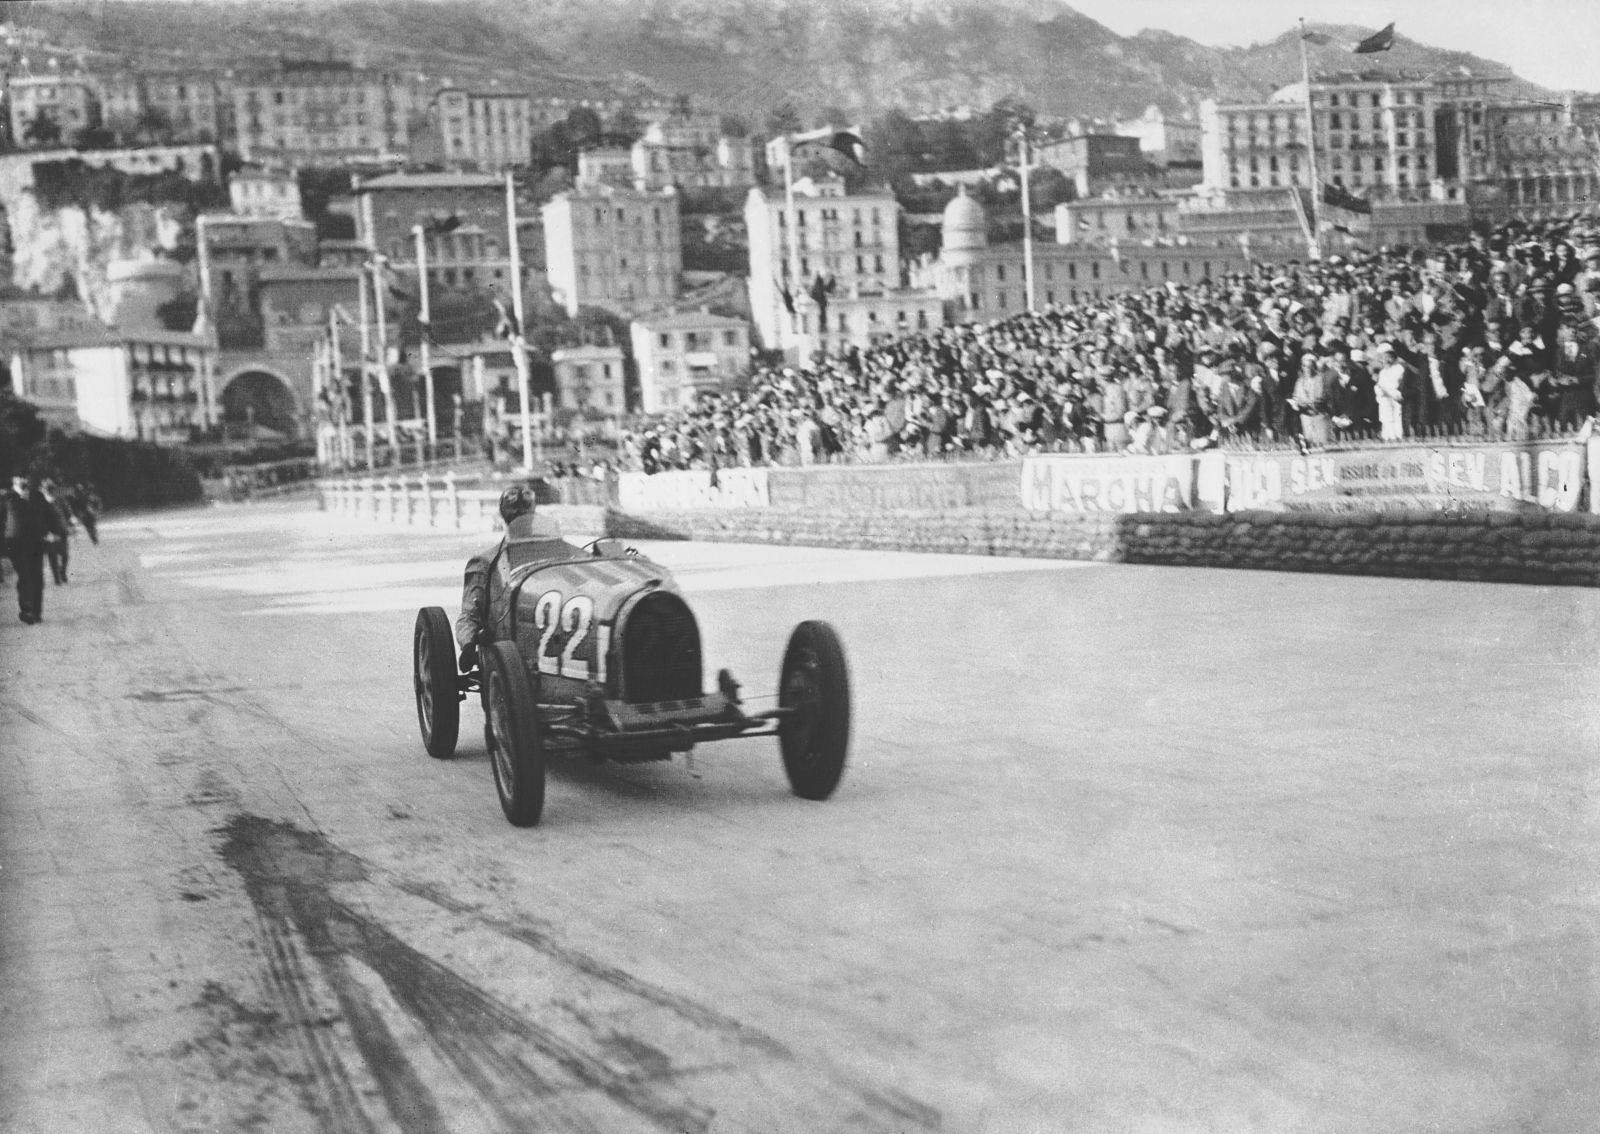 In 1931 Louis Chiron won the Monaco Grand Prix, the first and to date the only Monegasque to do so. He drove a Bugatti Type 51.